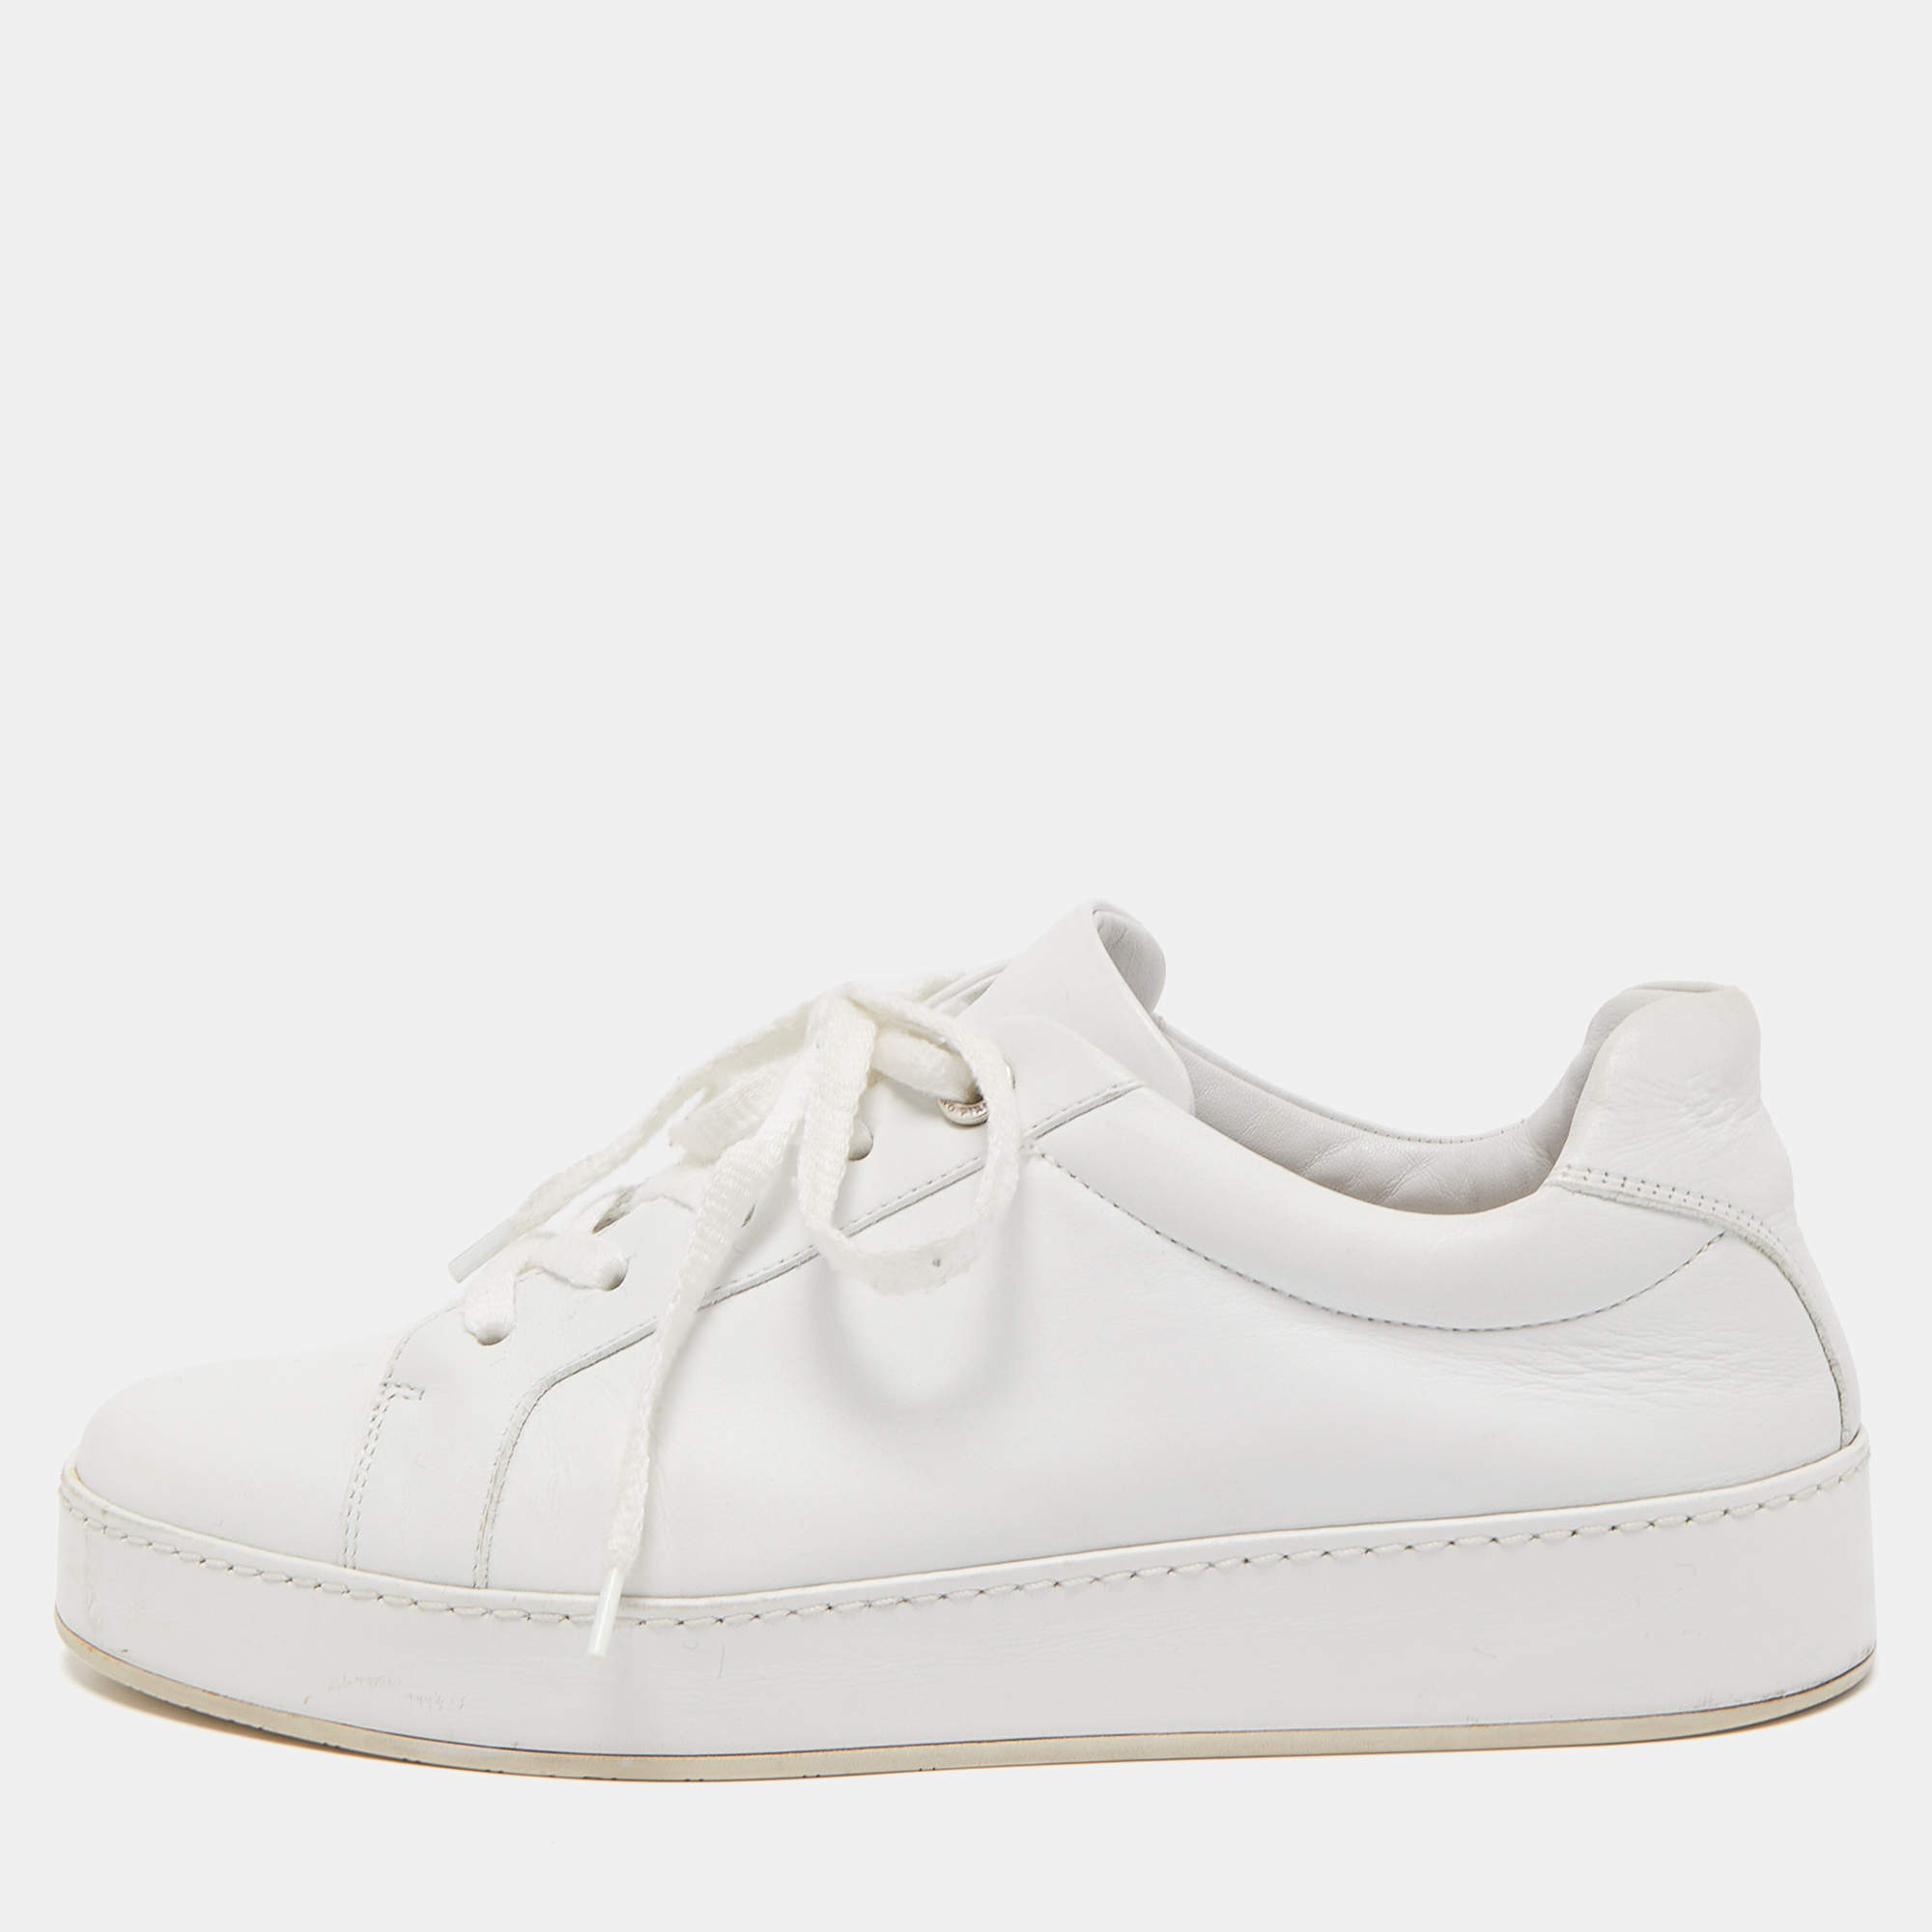 Loro Piana White Leather Nuages Sneakers Size 38 